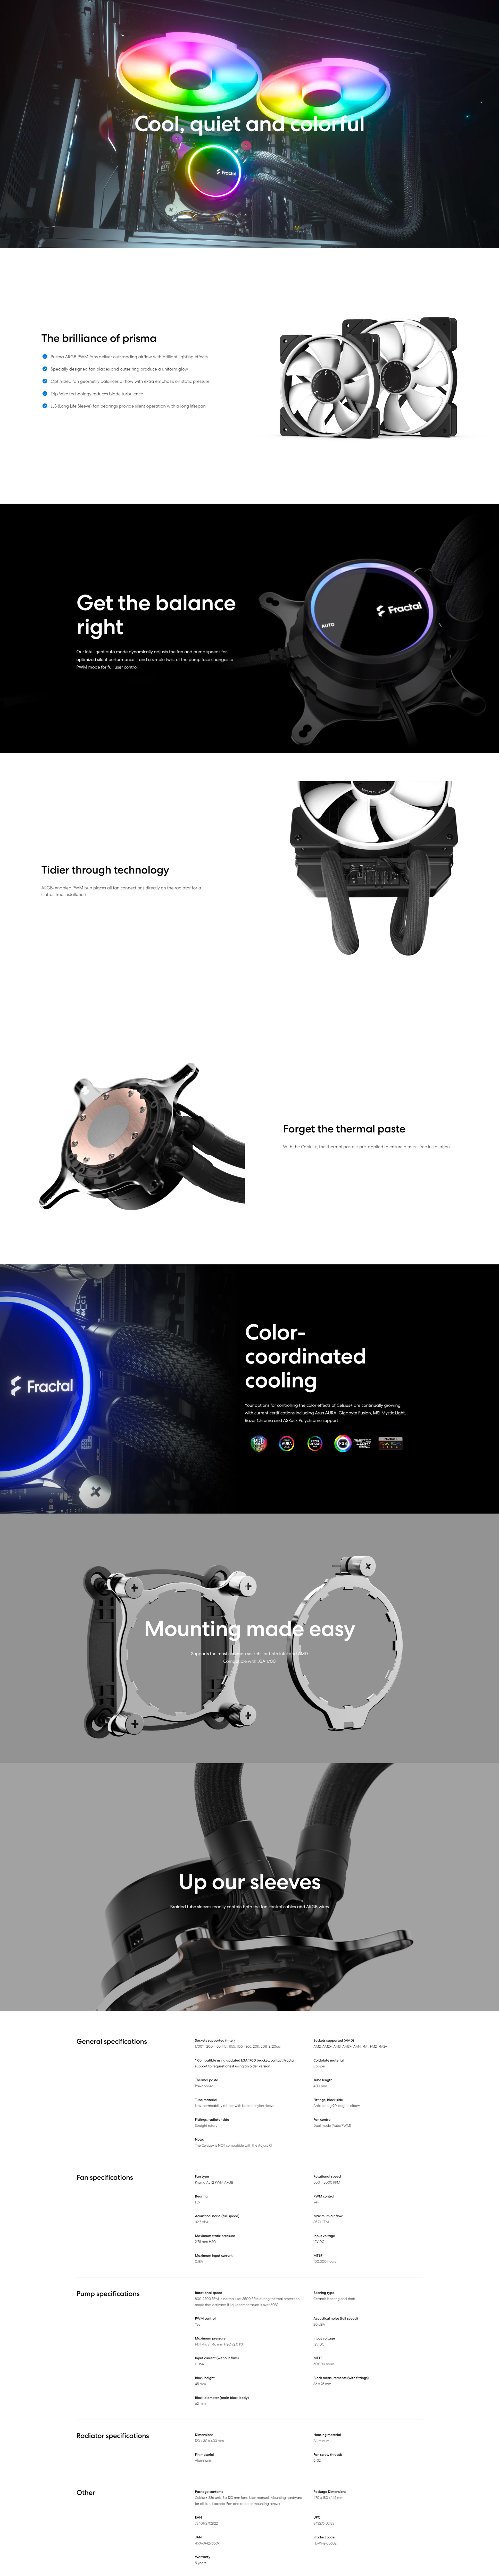 A large marketing image providing additional information about the product Fractal Design Celsius+ S36 Prisma 360mm AIO CPU Cooler - Additional alt info not provided